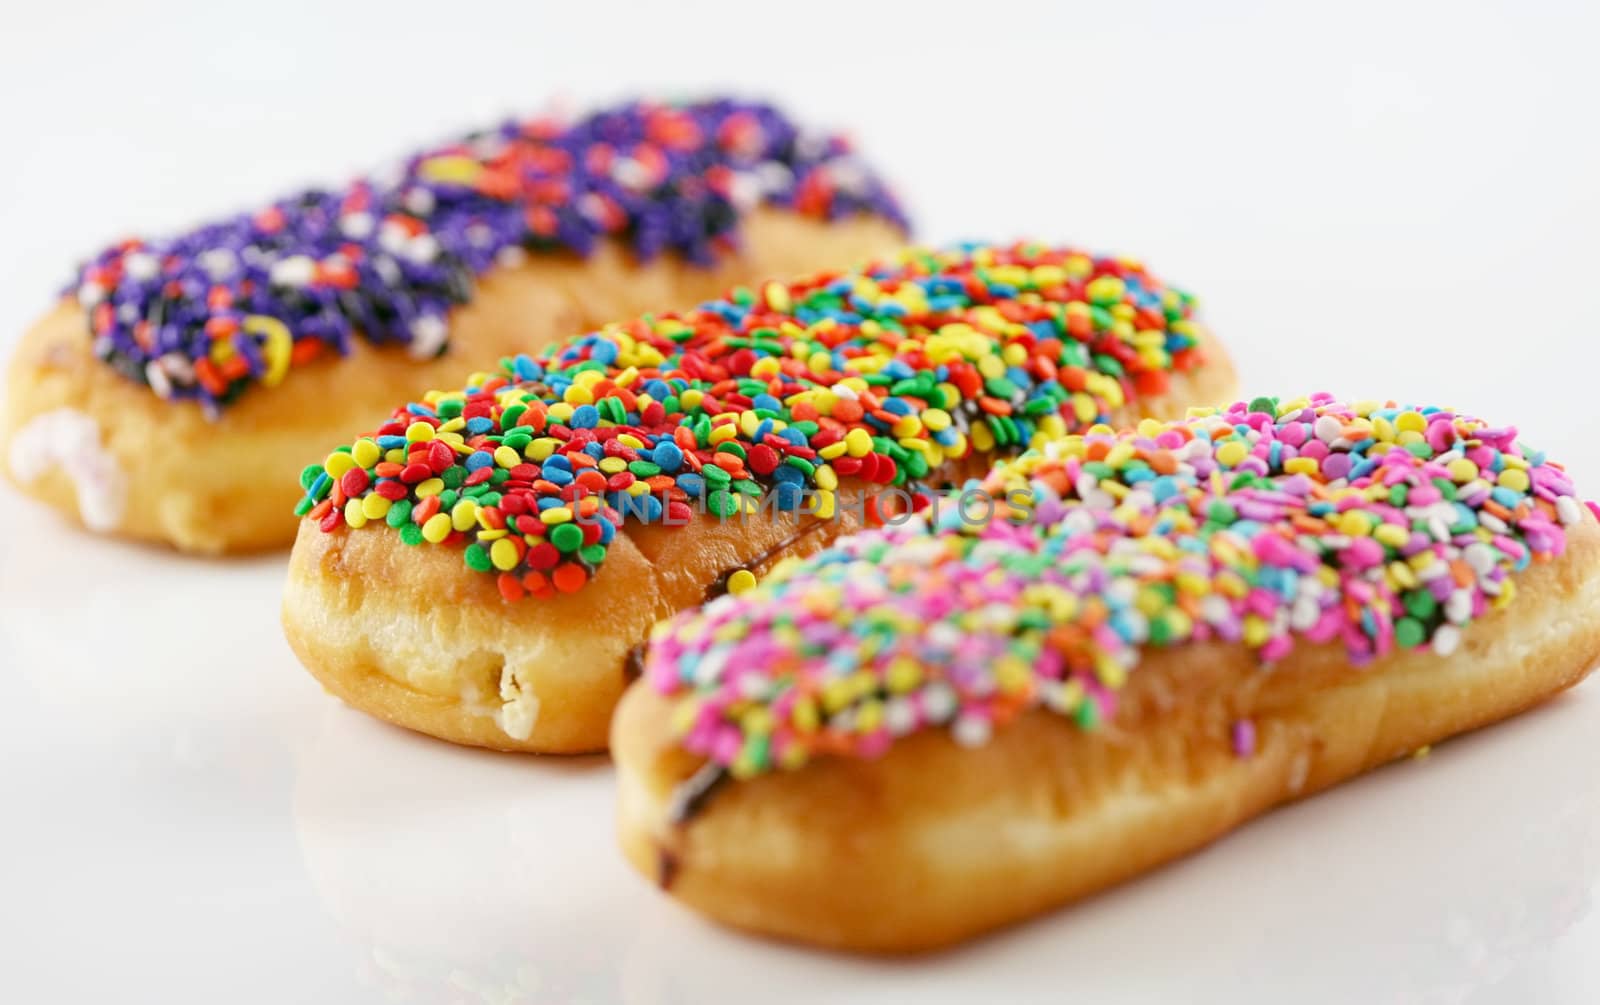 Three colorful donuts topped with sprinkles by jarenwicklund